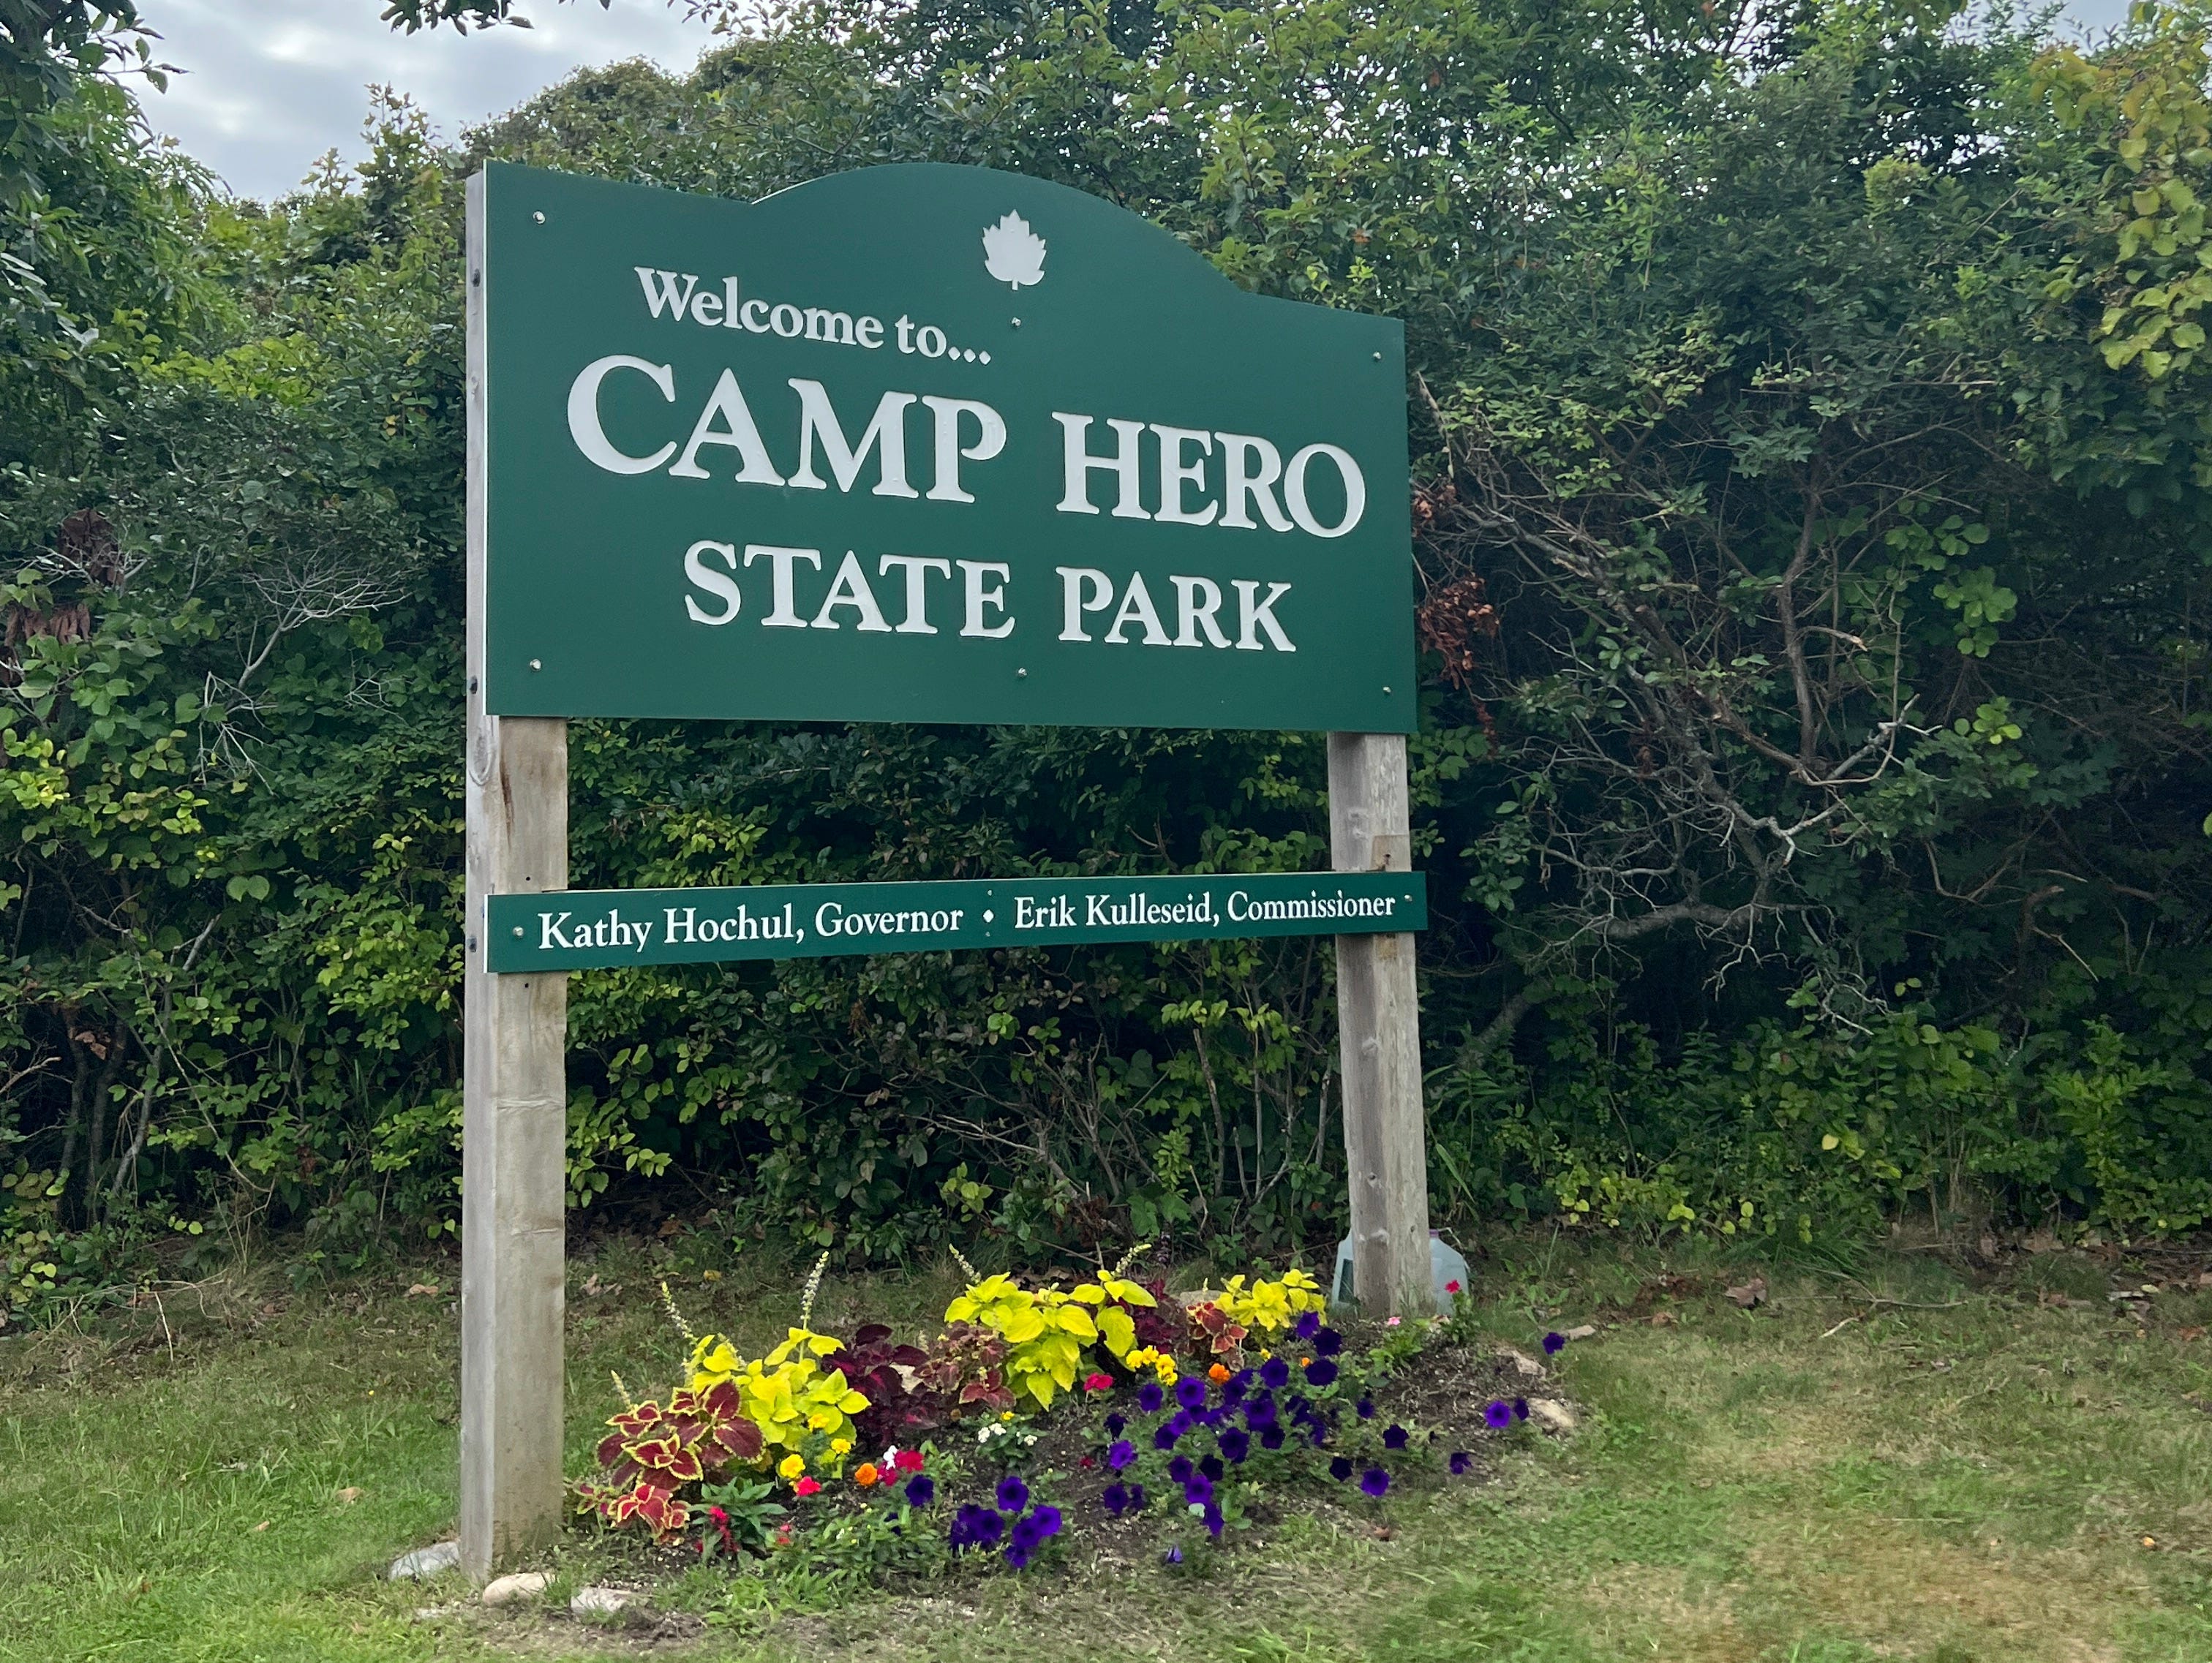 <p>According to signs in the park outlining Camp Hero's history, the US Army commissioned Camp Hero in May 1942 — five months after the US joined World War II in December 1941 — to defend against German submarines and boats.</p><p>The Army deactivated the base in 1947 and turned it over to the US Air Force in 1951, which remained there until 1982.</p><p><a href="https://www.nytimes.com/2006/11/24/travel/escapes/24hero.html">The New York Times</a> reported following a 2006 visit that Camp Hero, named for Major General Andrew Hero Jr. — who served as the chief of coast artillery from 1926 to 1930, according to <a href="https://www.arlingtoncemetery.net/hero-family.htm" rel="noopener">Arlington National Cemetery</a> — opened to the public in 2002.</p>